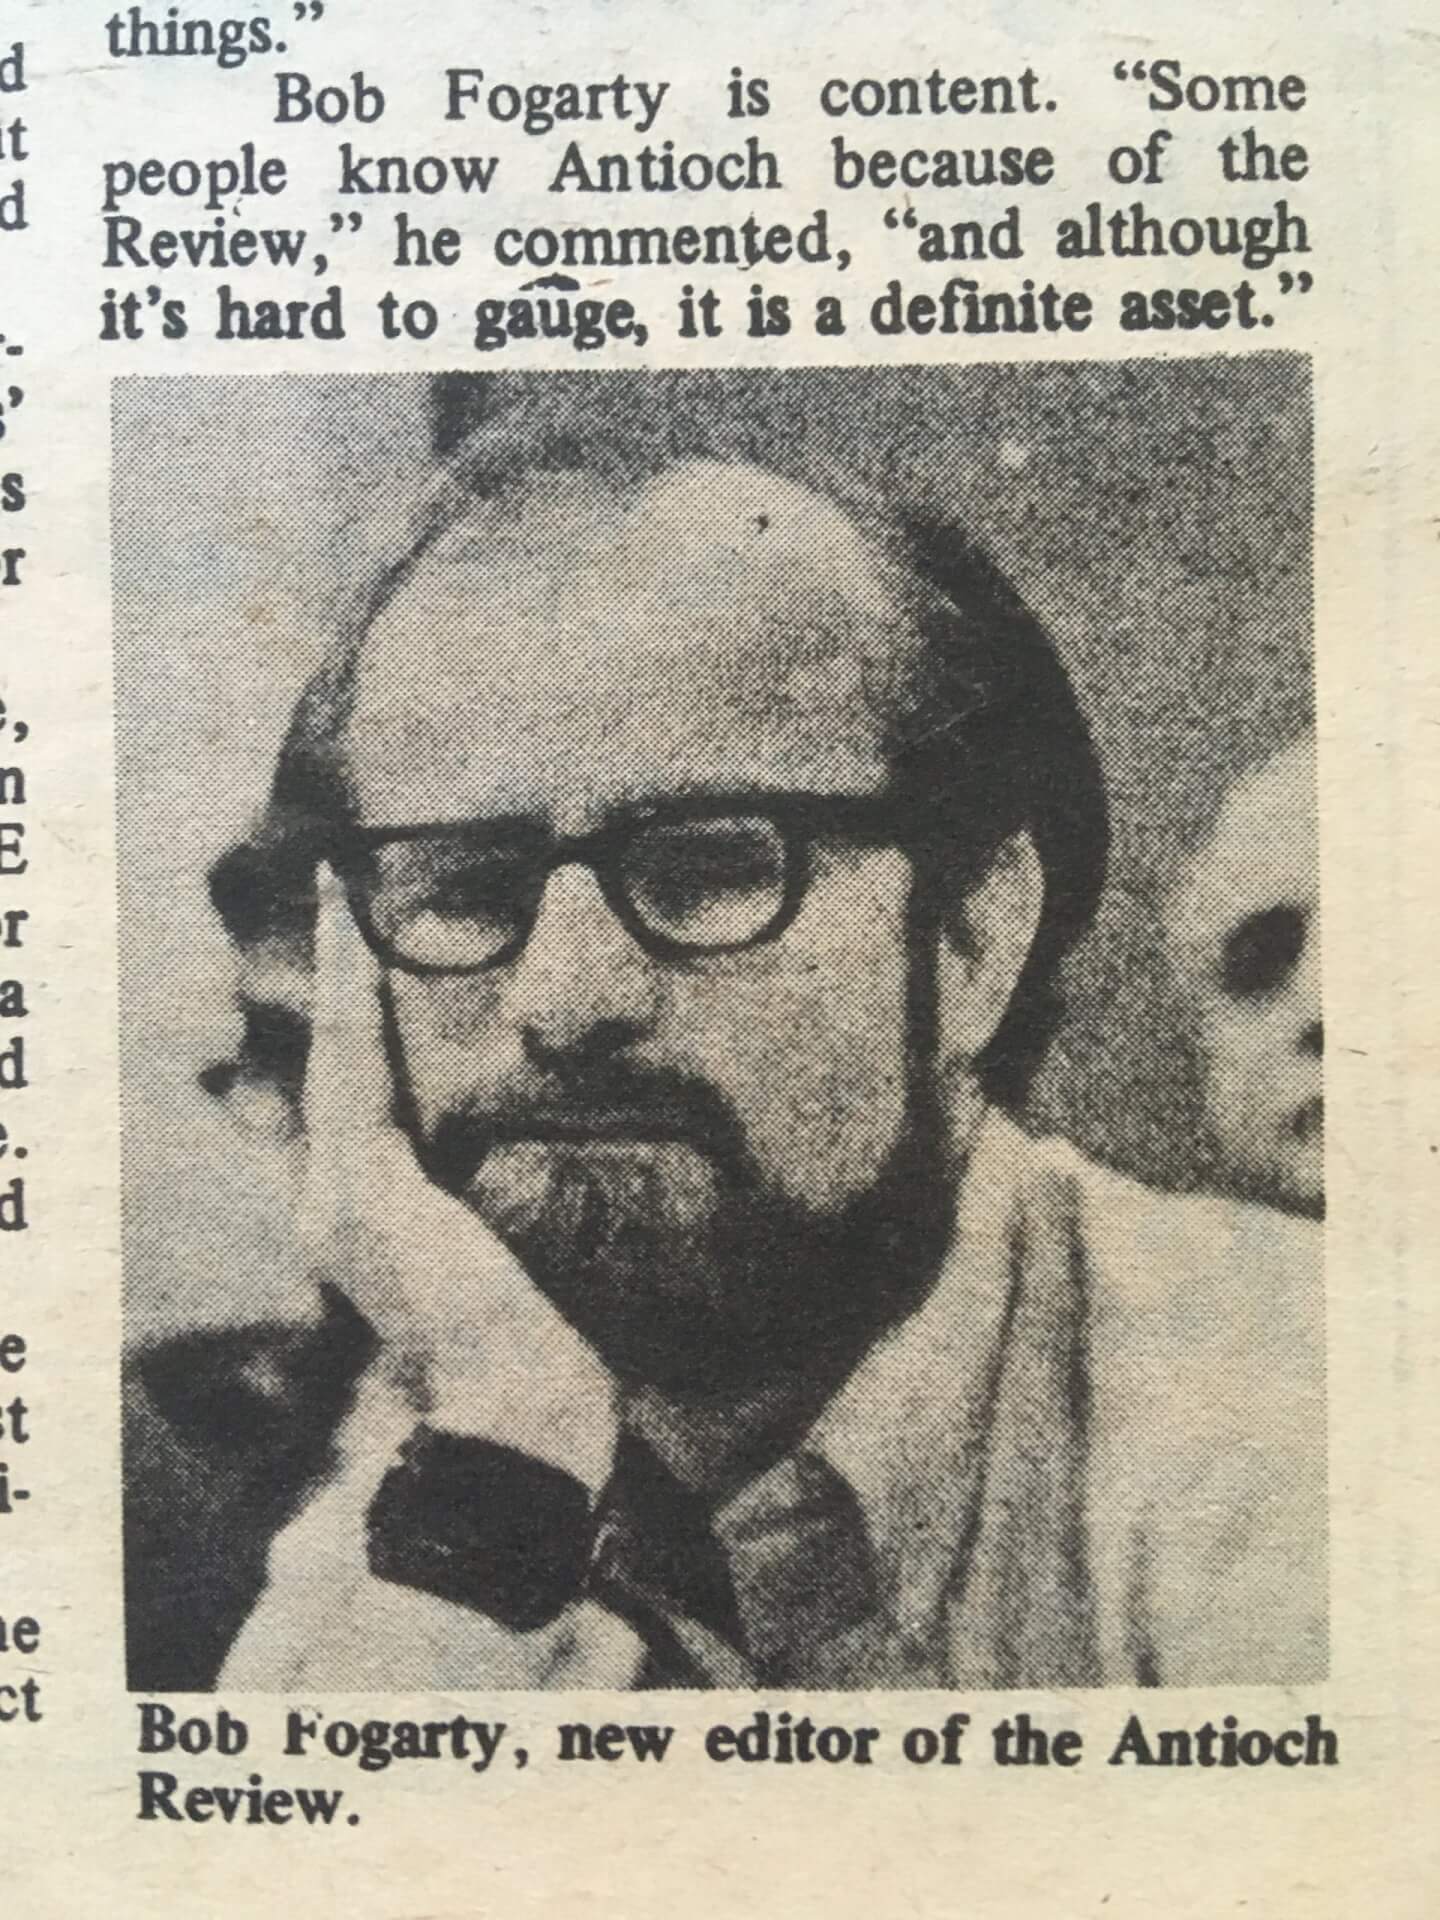 Fogarty at the time of his appointment as Antioch Review Editor